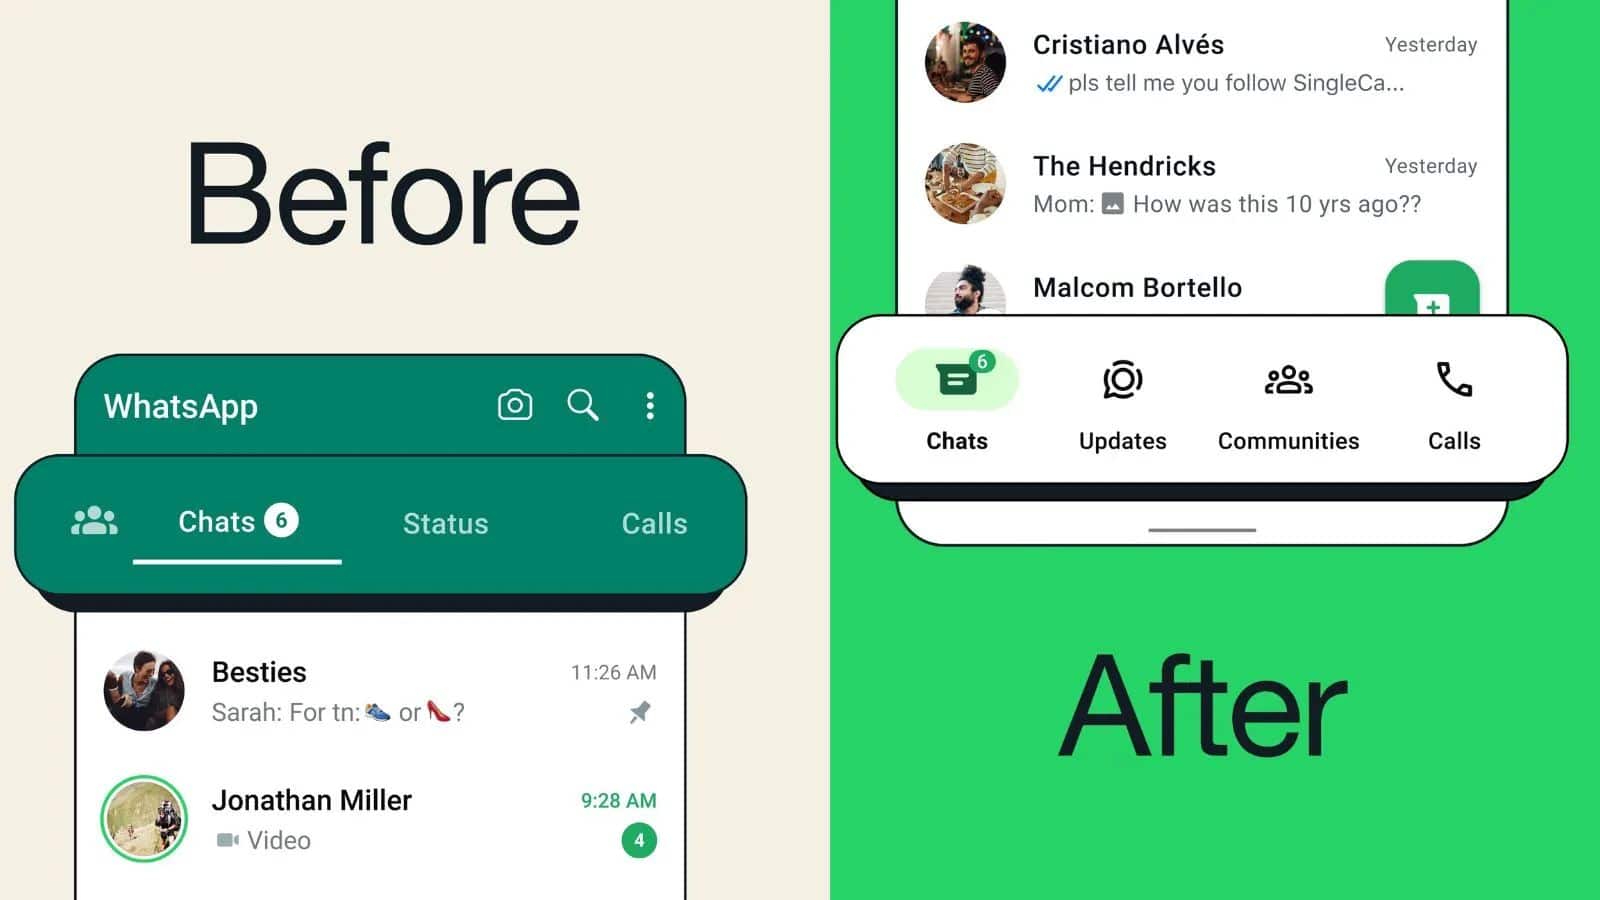 WhatsApp introduces new bottom navigation bar for Android users